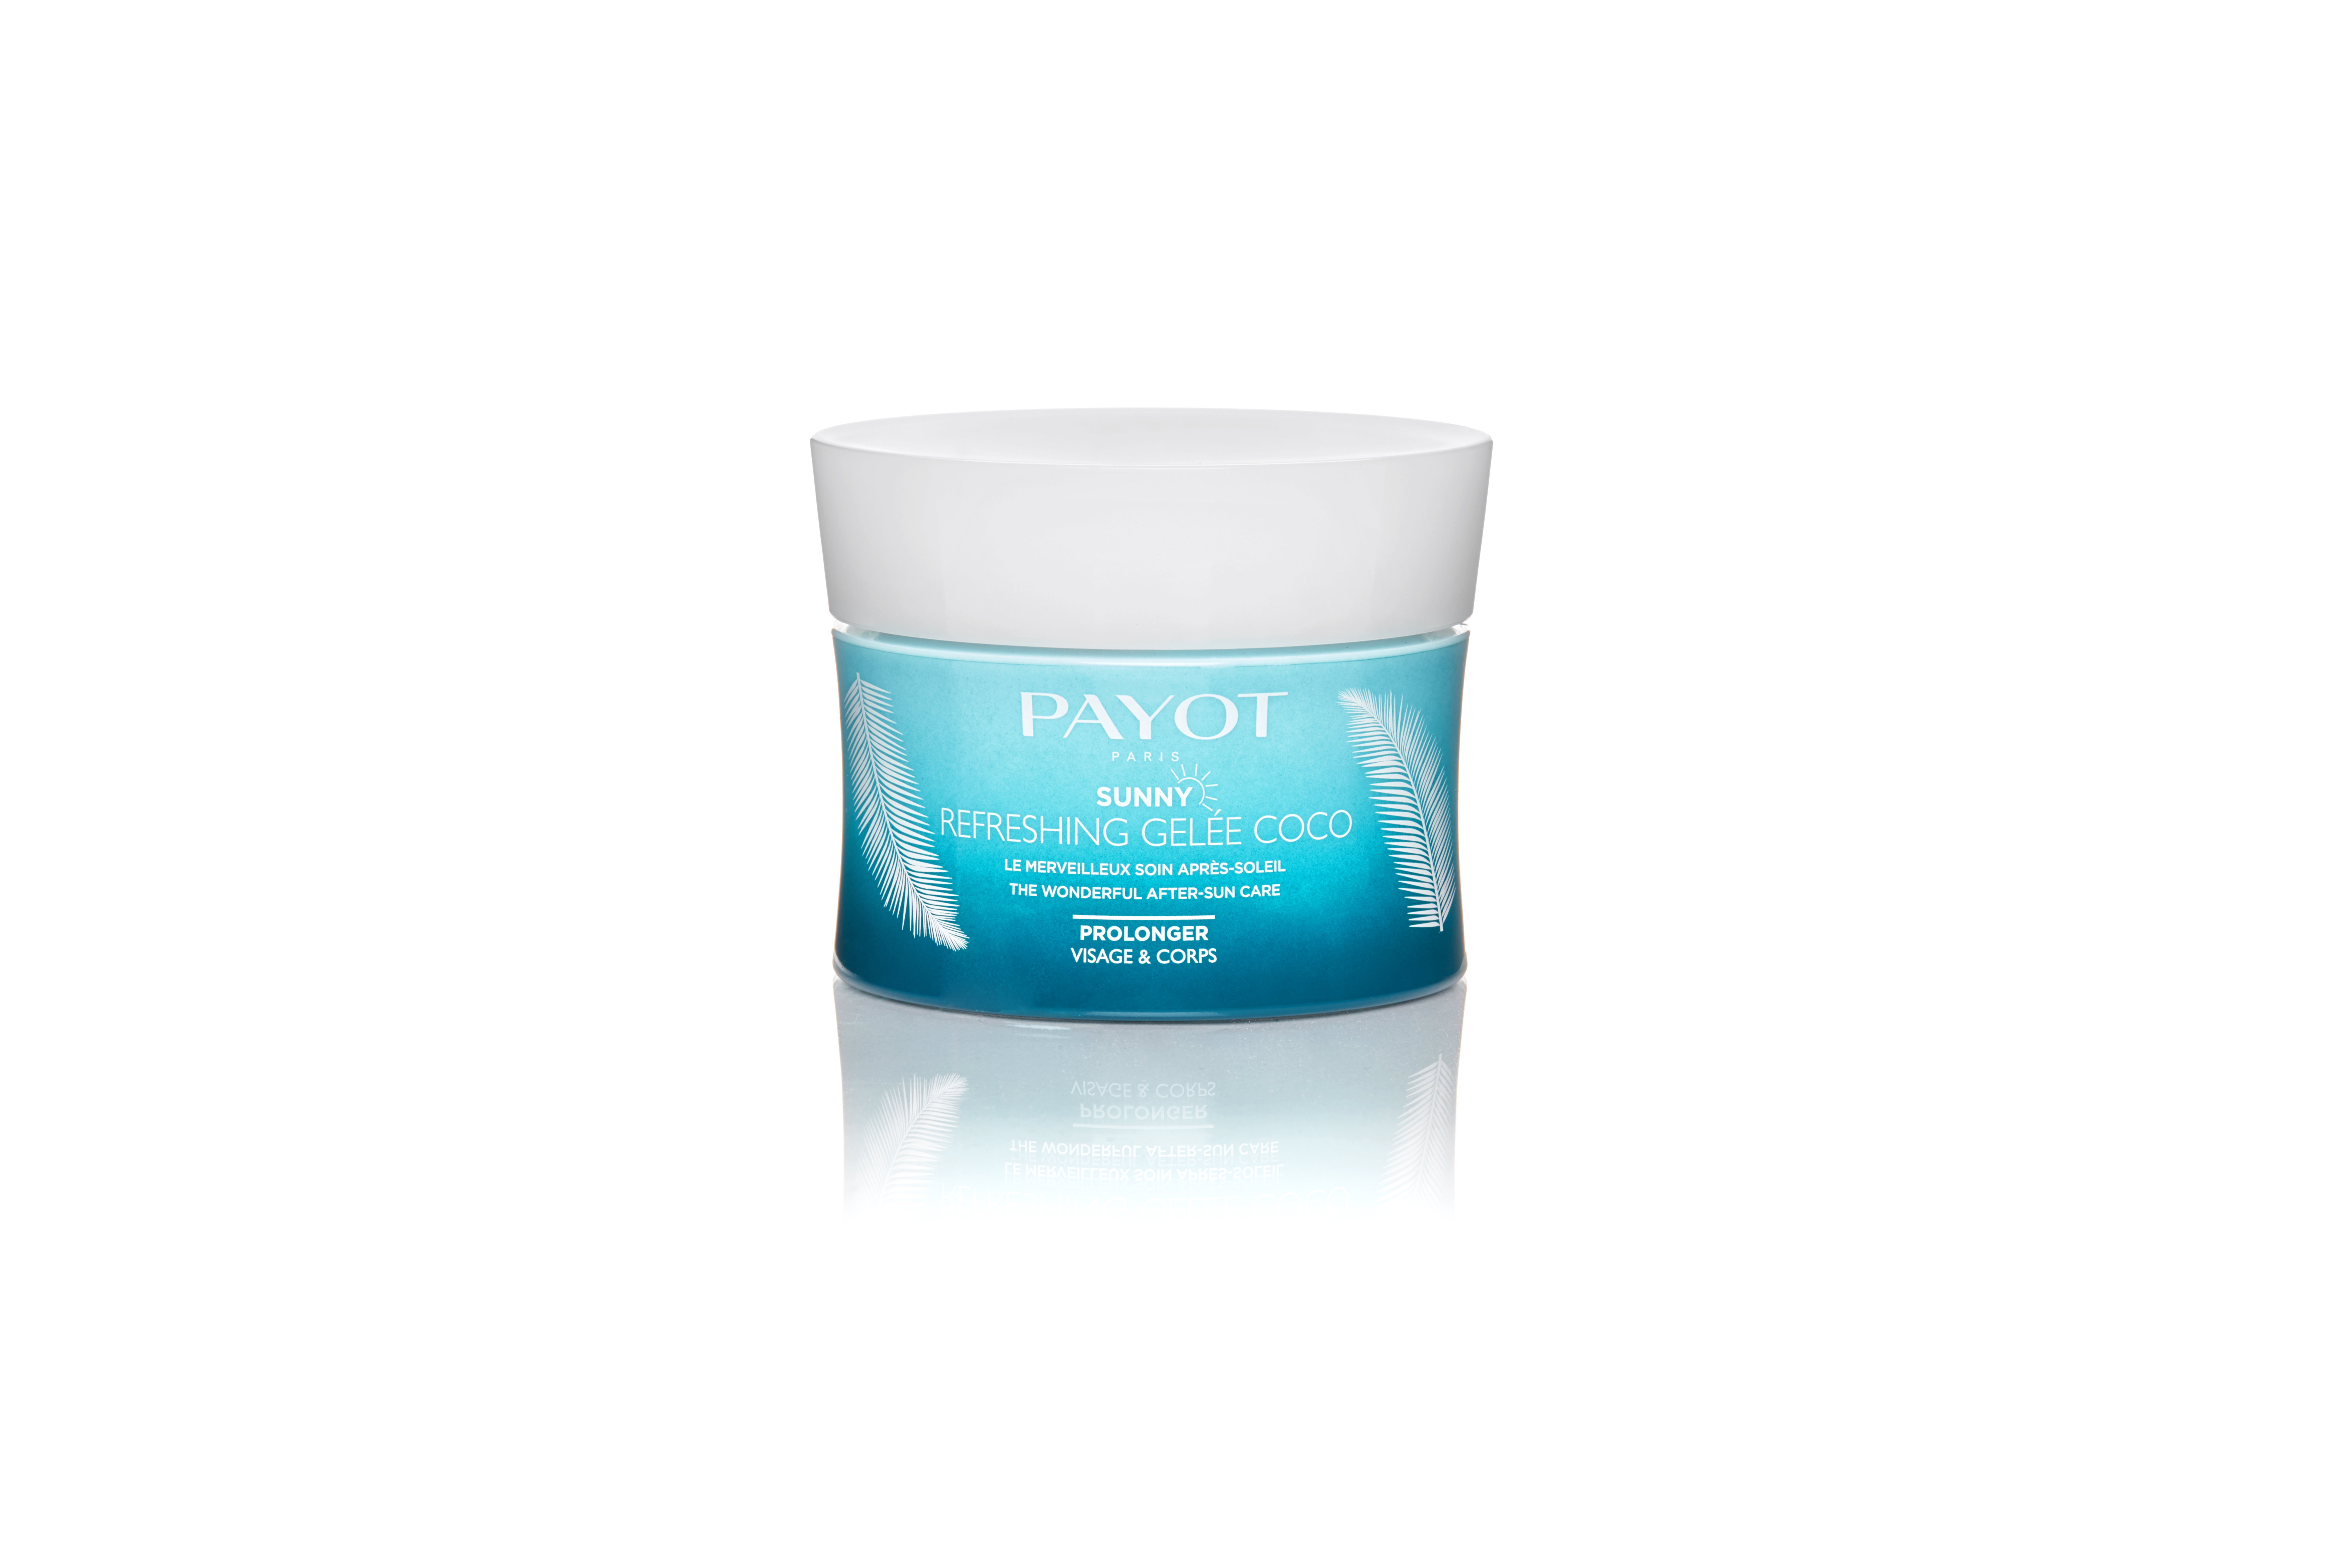 PAYOT Sunny Refreshing Gelée Coco aftersun